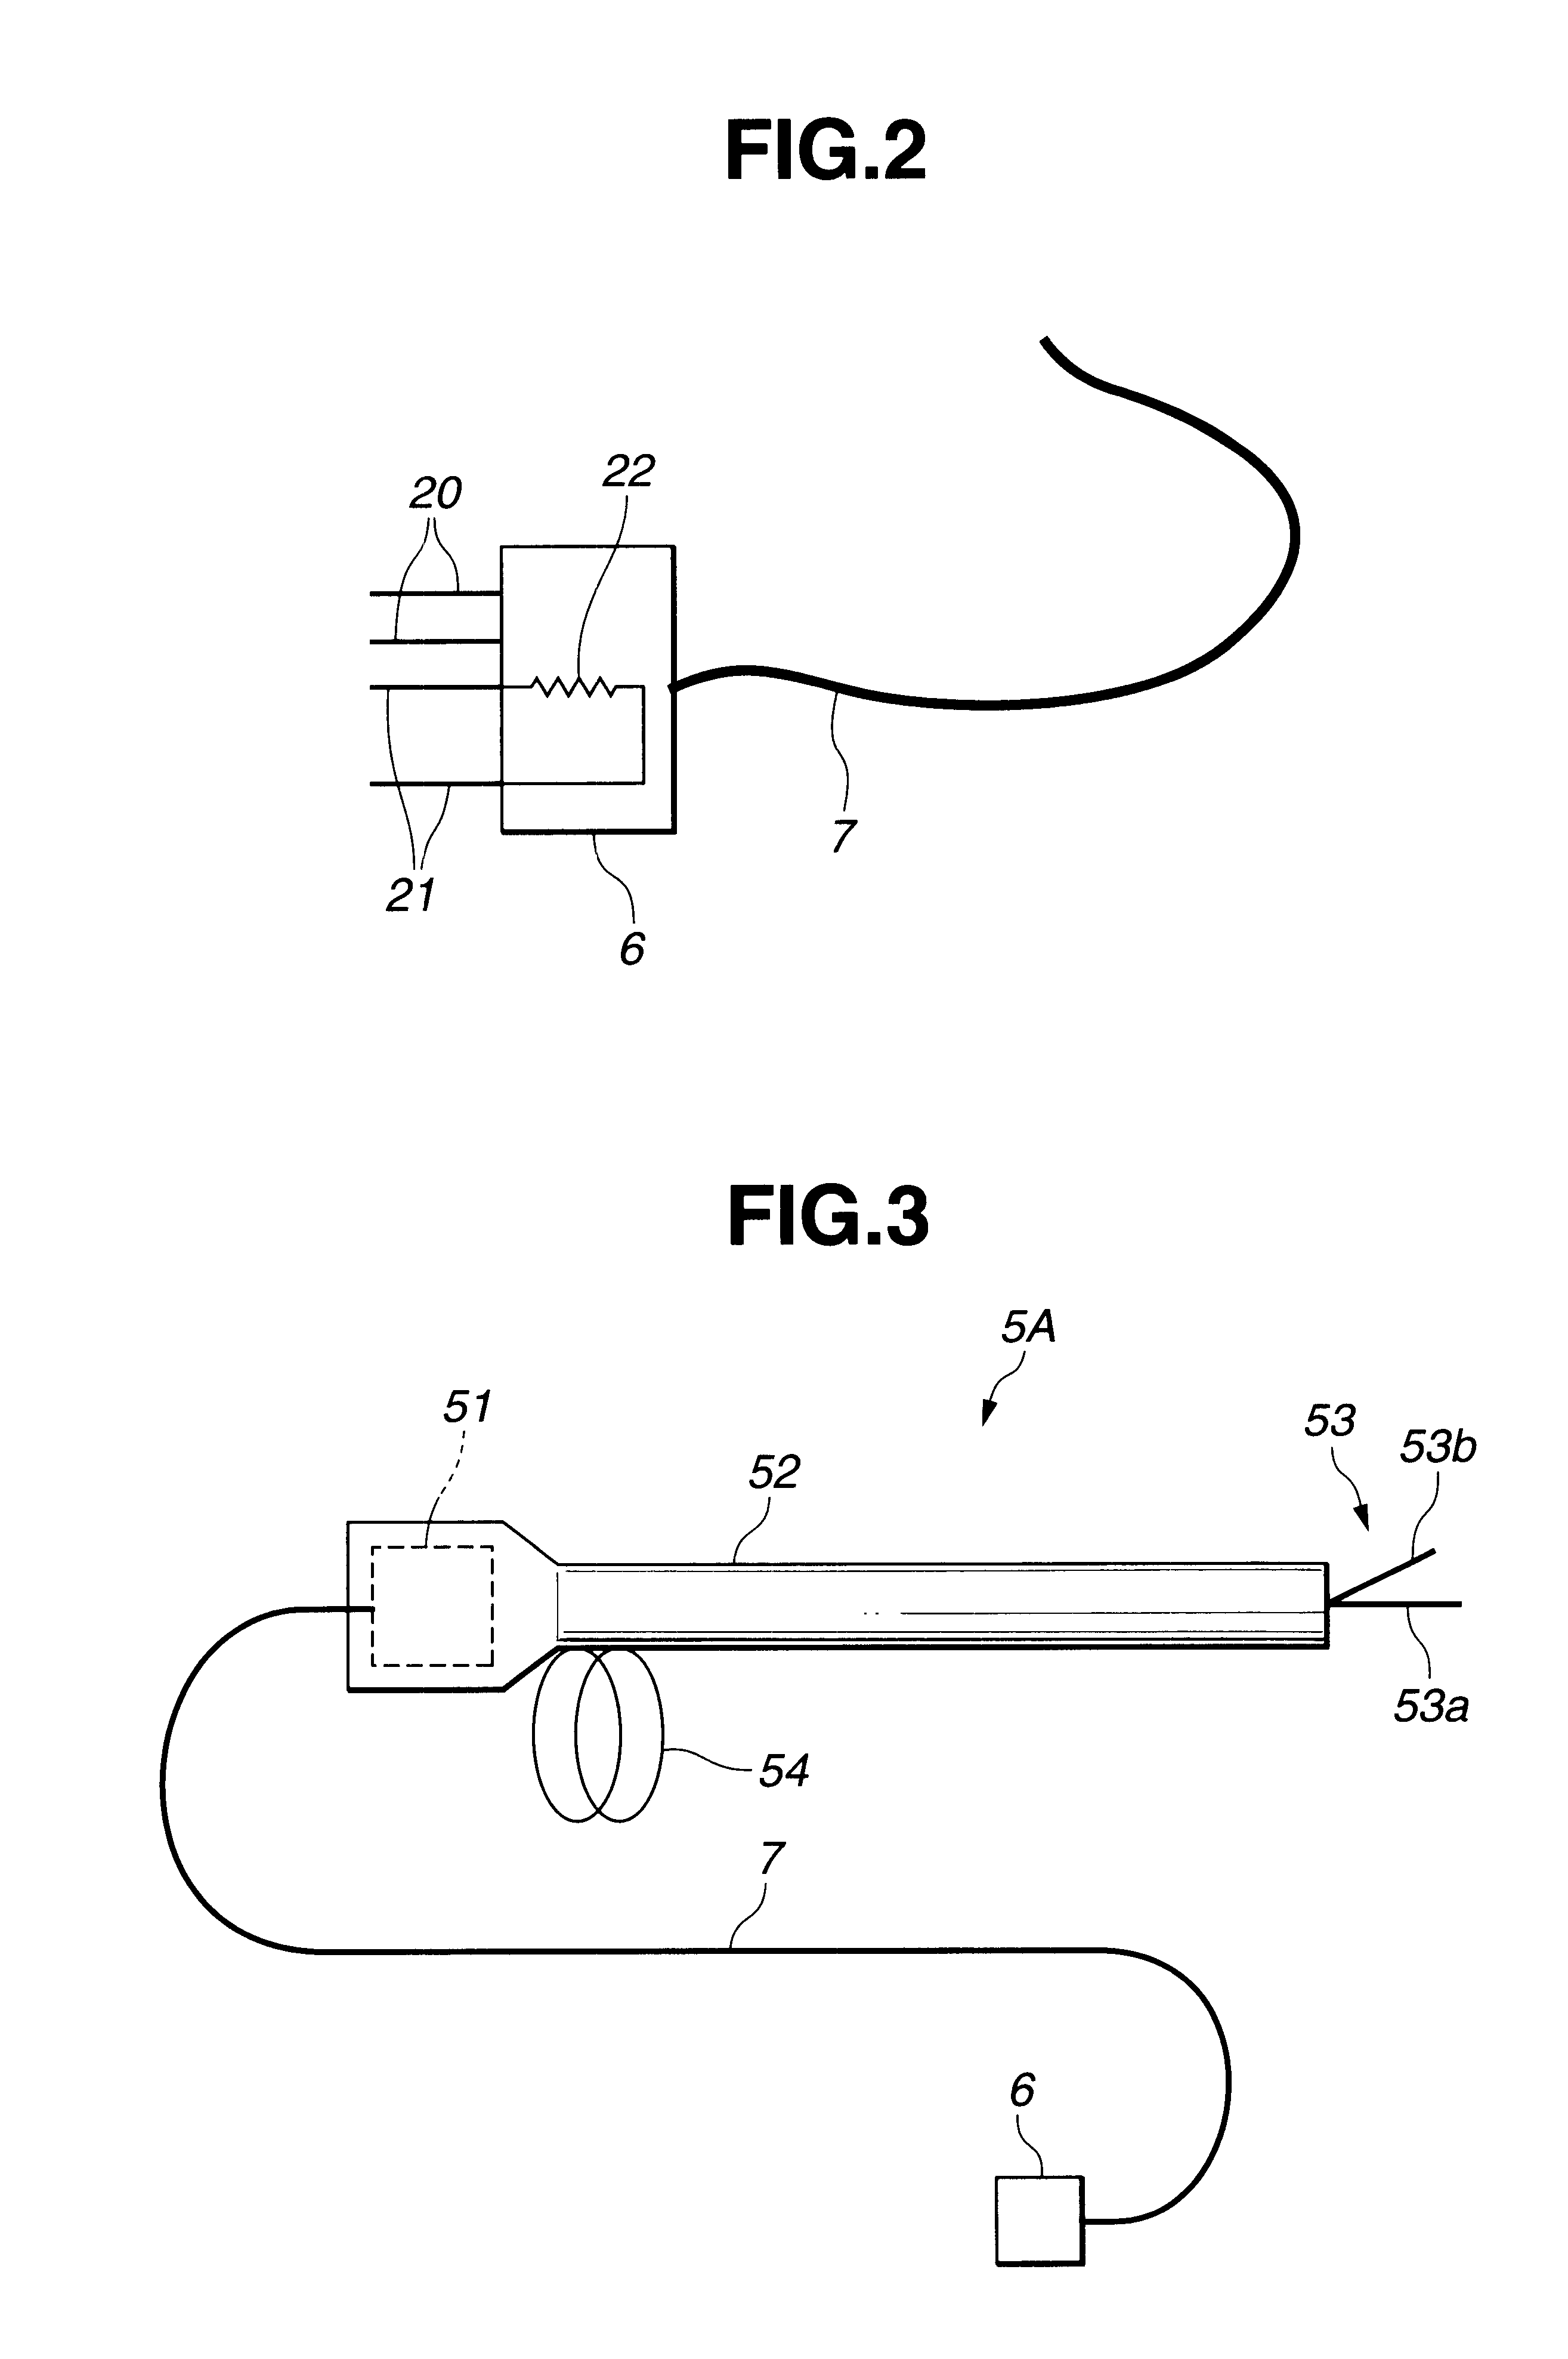 Electric treatment system